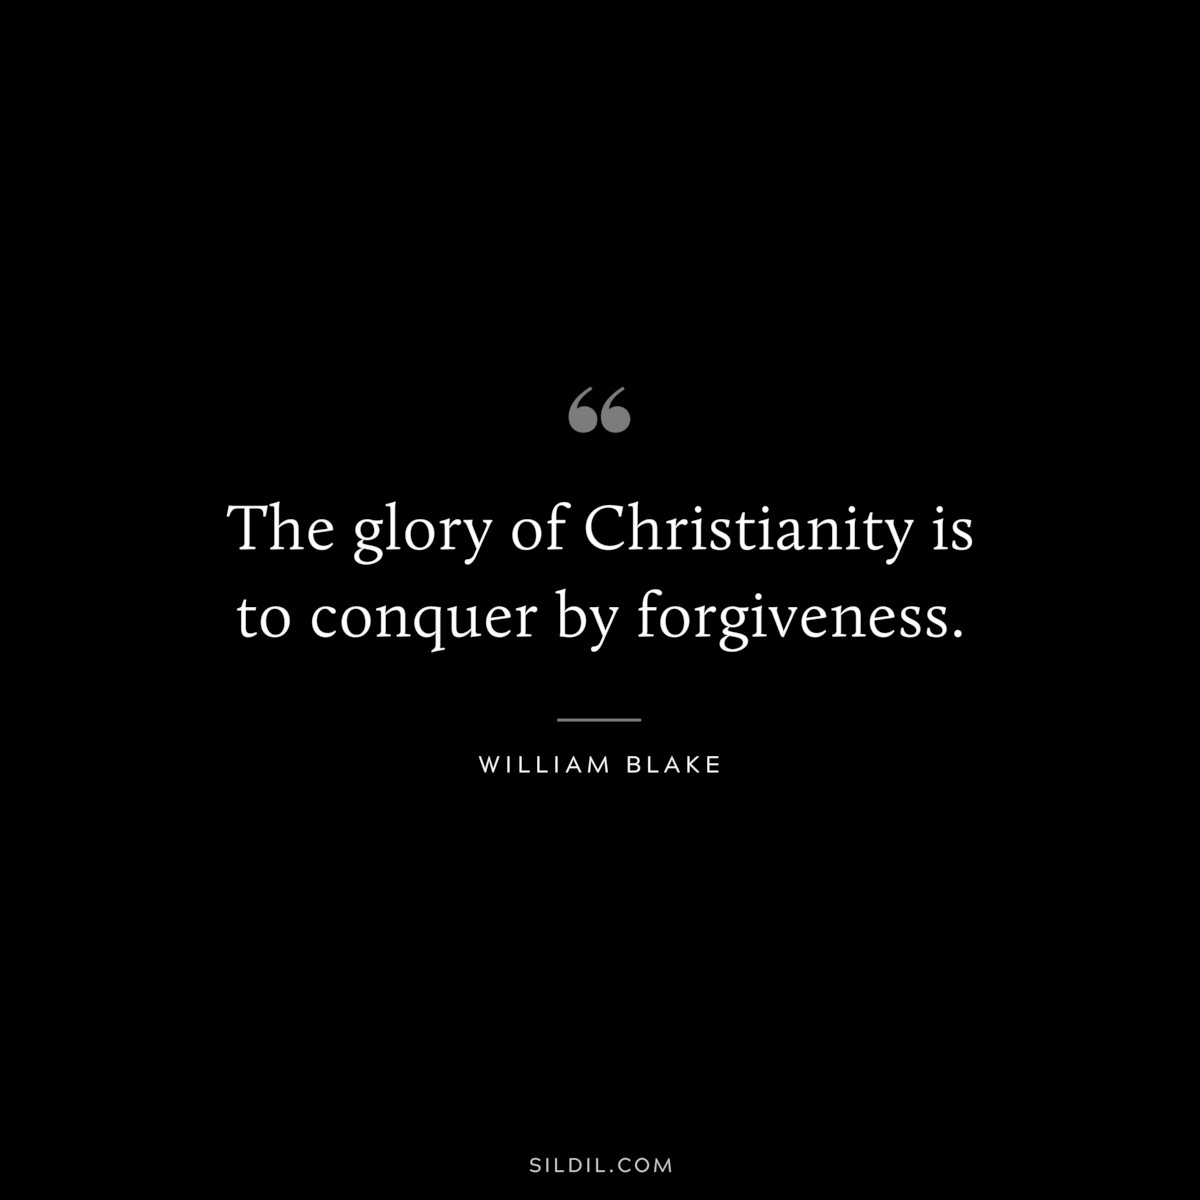 The glory of Christianity is to conquer by forgiveness. ― William Blake